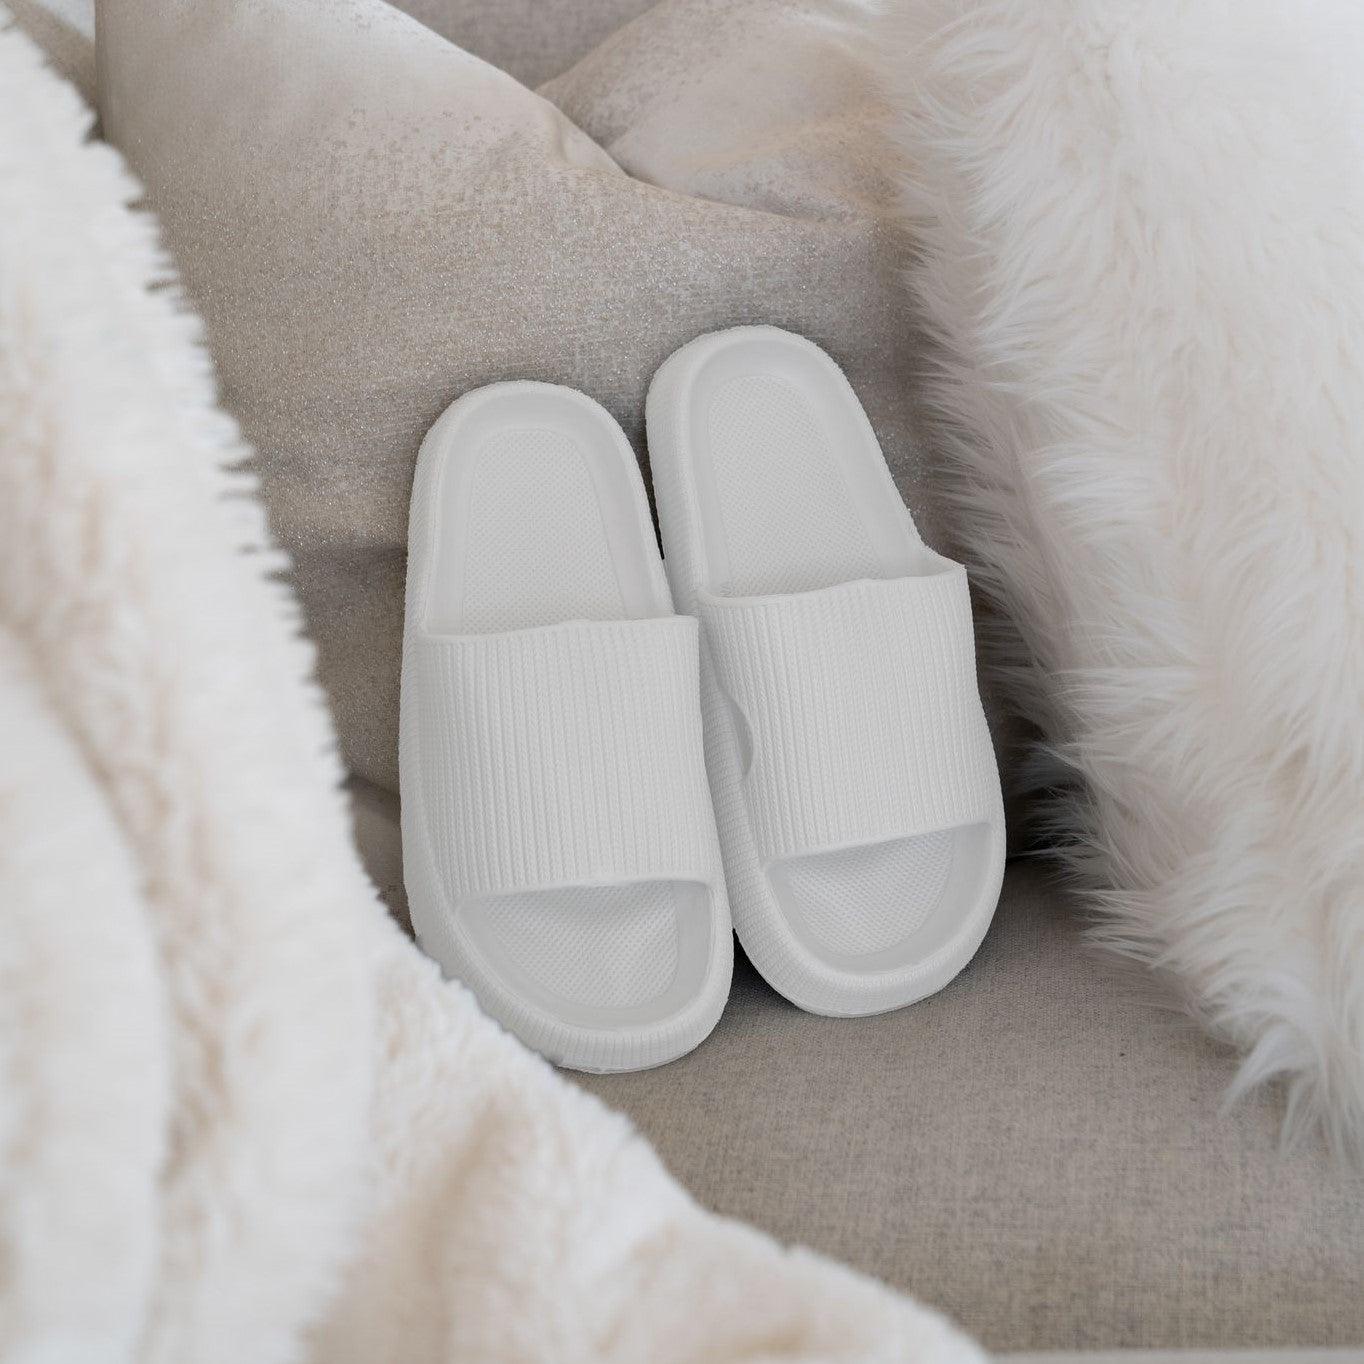 White slip-ons on couch between pillows